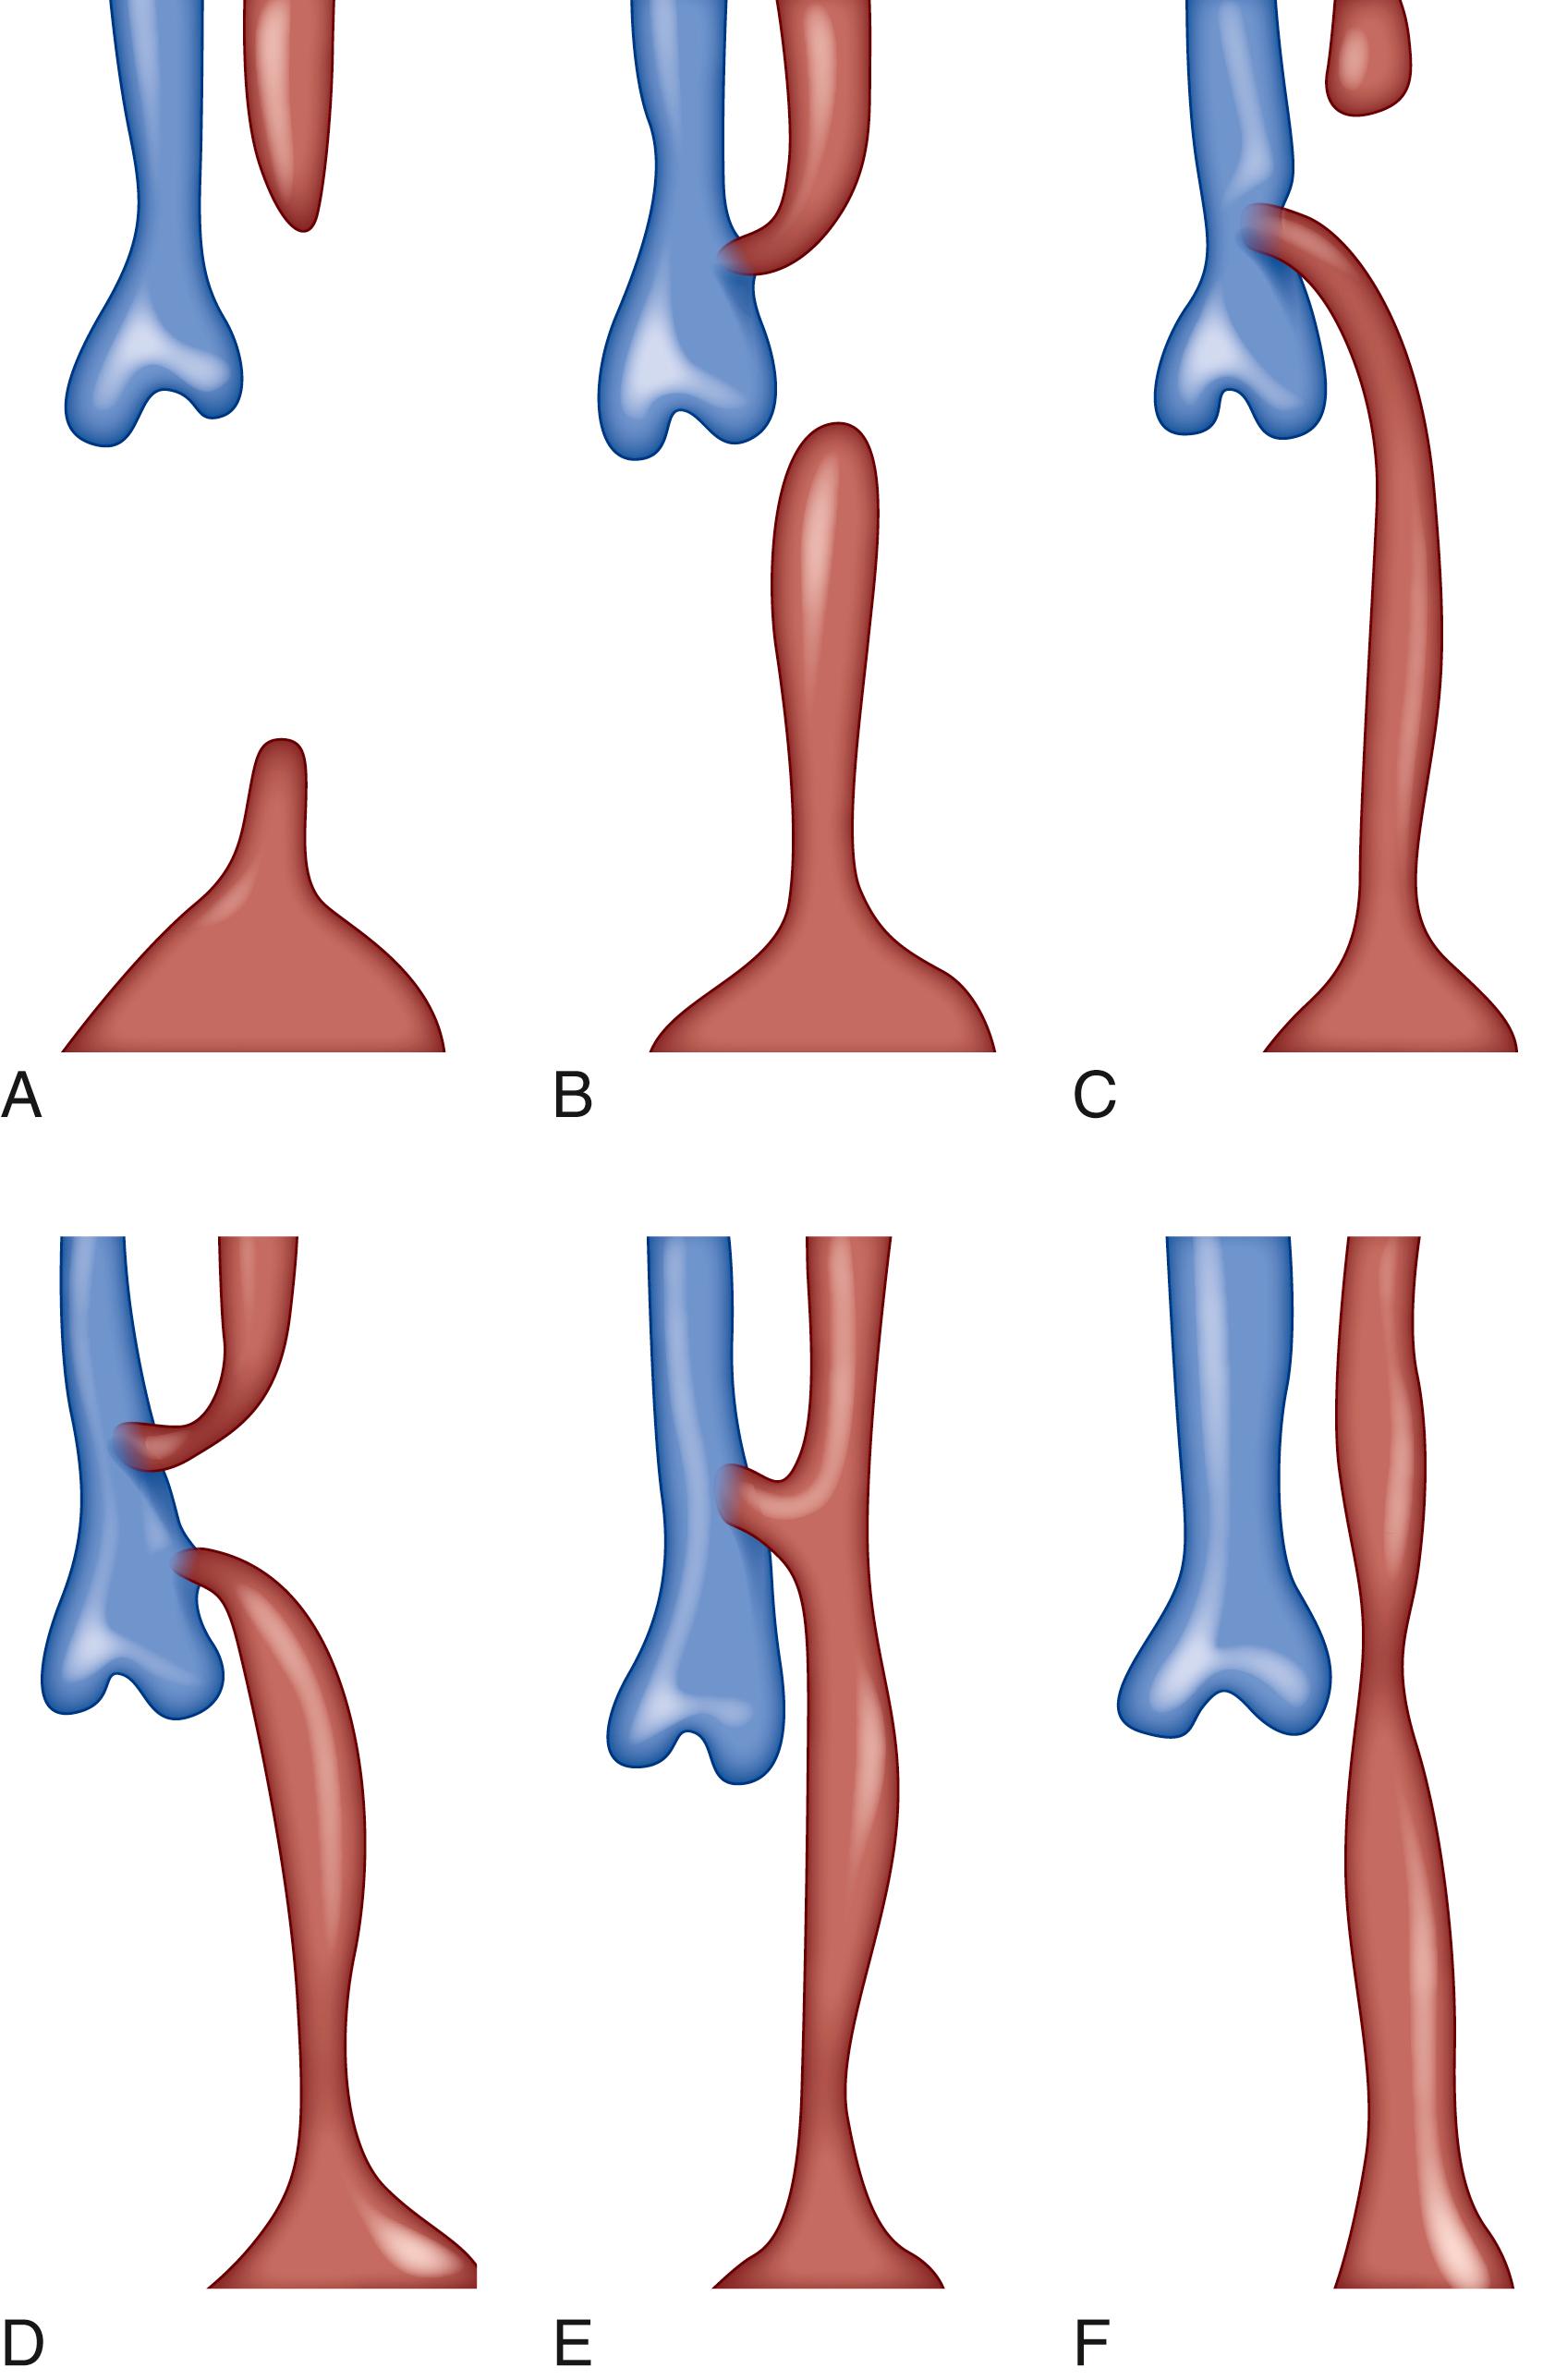 Fig. 82.2, Types of esophageal atresia and tracheoesophageal fistula. The tracheal pouch and the lower and upper esophageal pouches are represented in blue and pink, respectively. (A) Type A, isolated esophageal atresia. (B) Type B, blind-ending lower esophageal pouch with a fistula between the trachea and the upper esophageal pouch. (C) Type C, esophageal atresia with a blind proximal esophageal pouch and a distal tracheoesophageal fistula. This anomaly represents approximately 85% of all esophageal atresia. (D) Type D, esophageal atresia with two fistulas between the trachea and the lower and upper esophageal pouches. (E) Type E, fistula between the esophagus and the trachea. (F) Congenital esophageal stenosis.